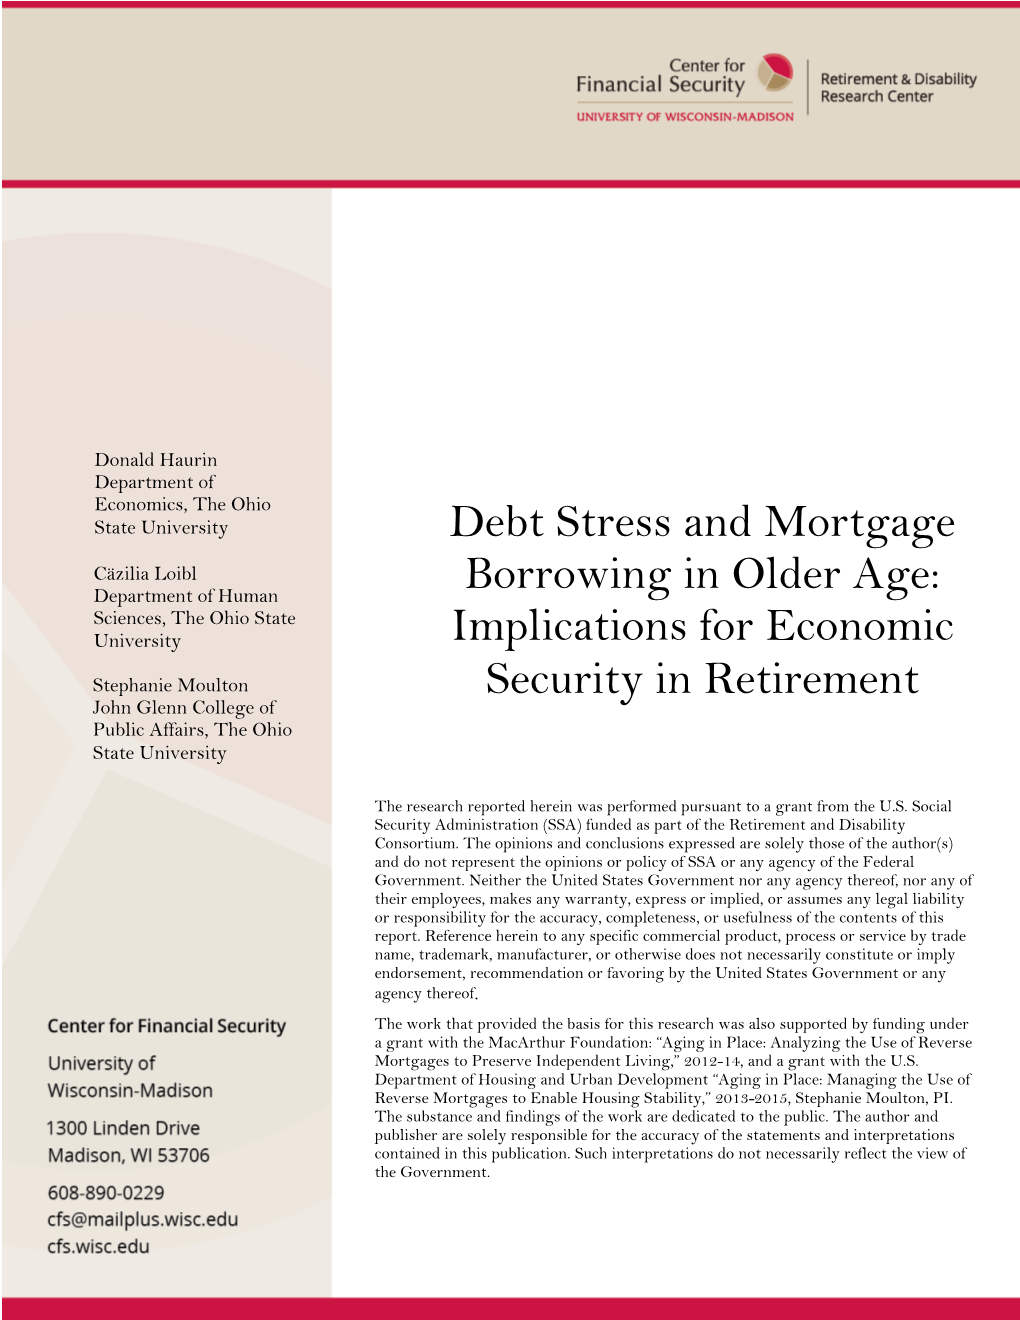 Debt Stress and Mortgage Borrowing in Older Age Page 1